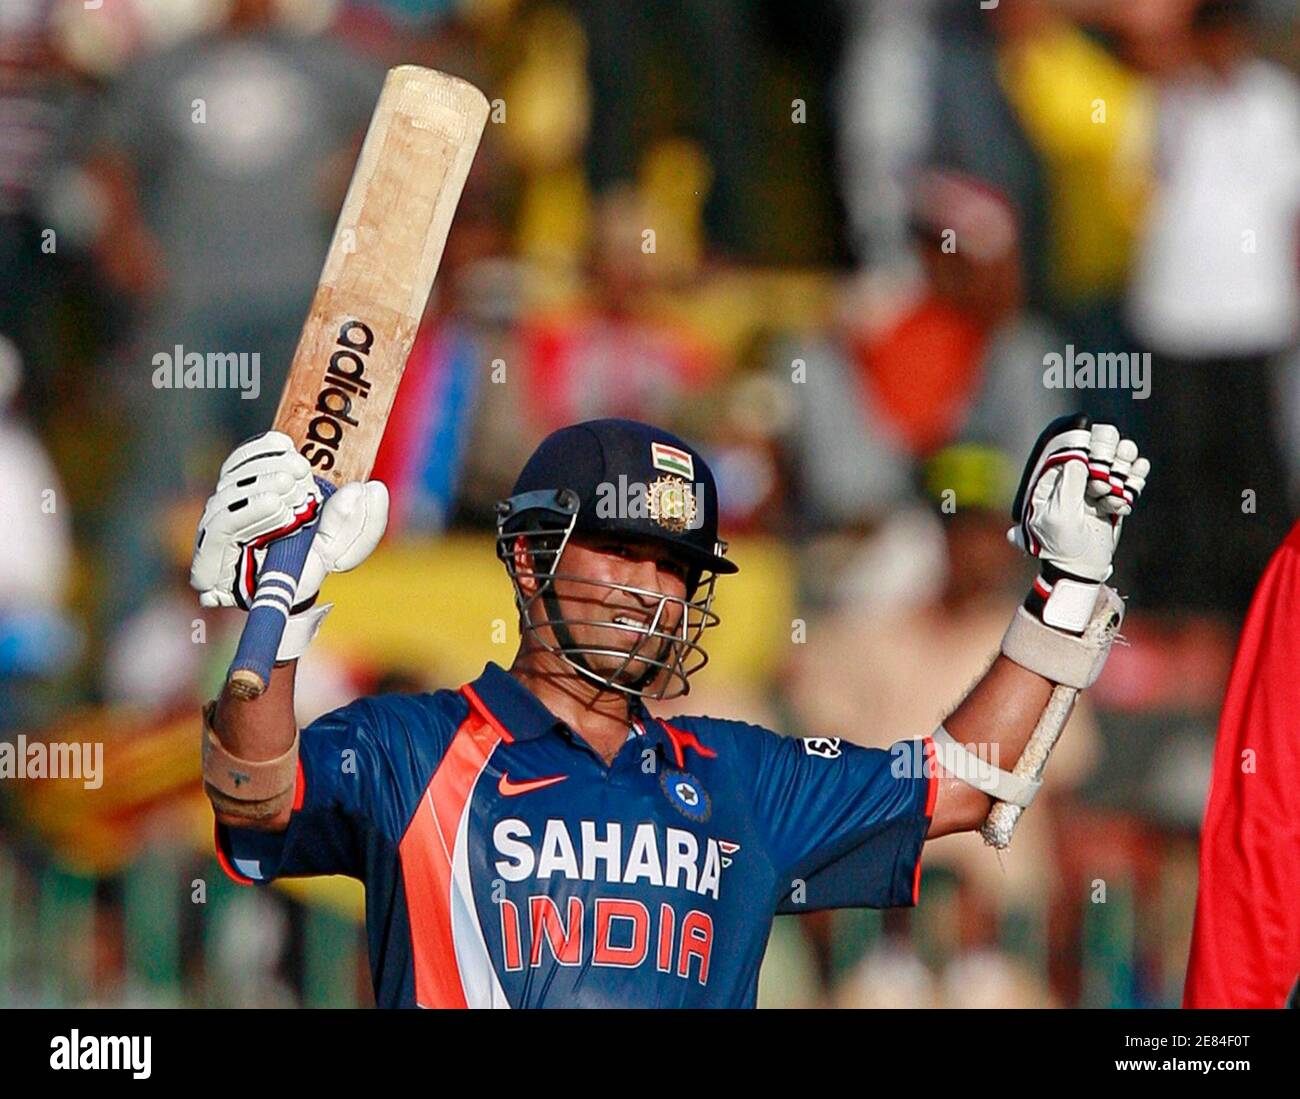 India's Sachin Tendulkar raises his bat as he celebrates a century (100 runs) the finals of the tri-nations one-day international cricket series against Lanka in Colombo September 14,